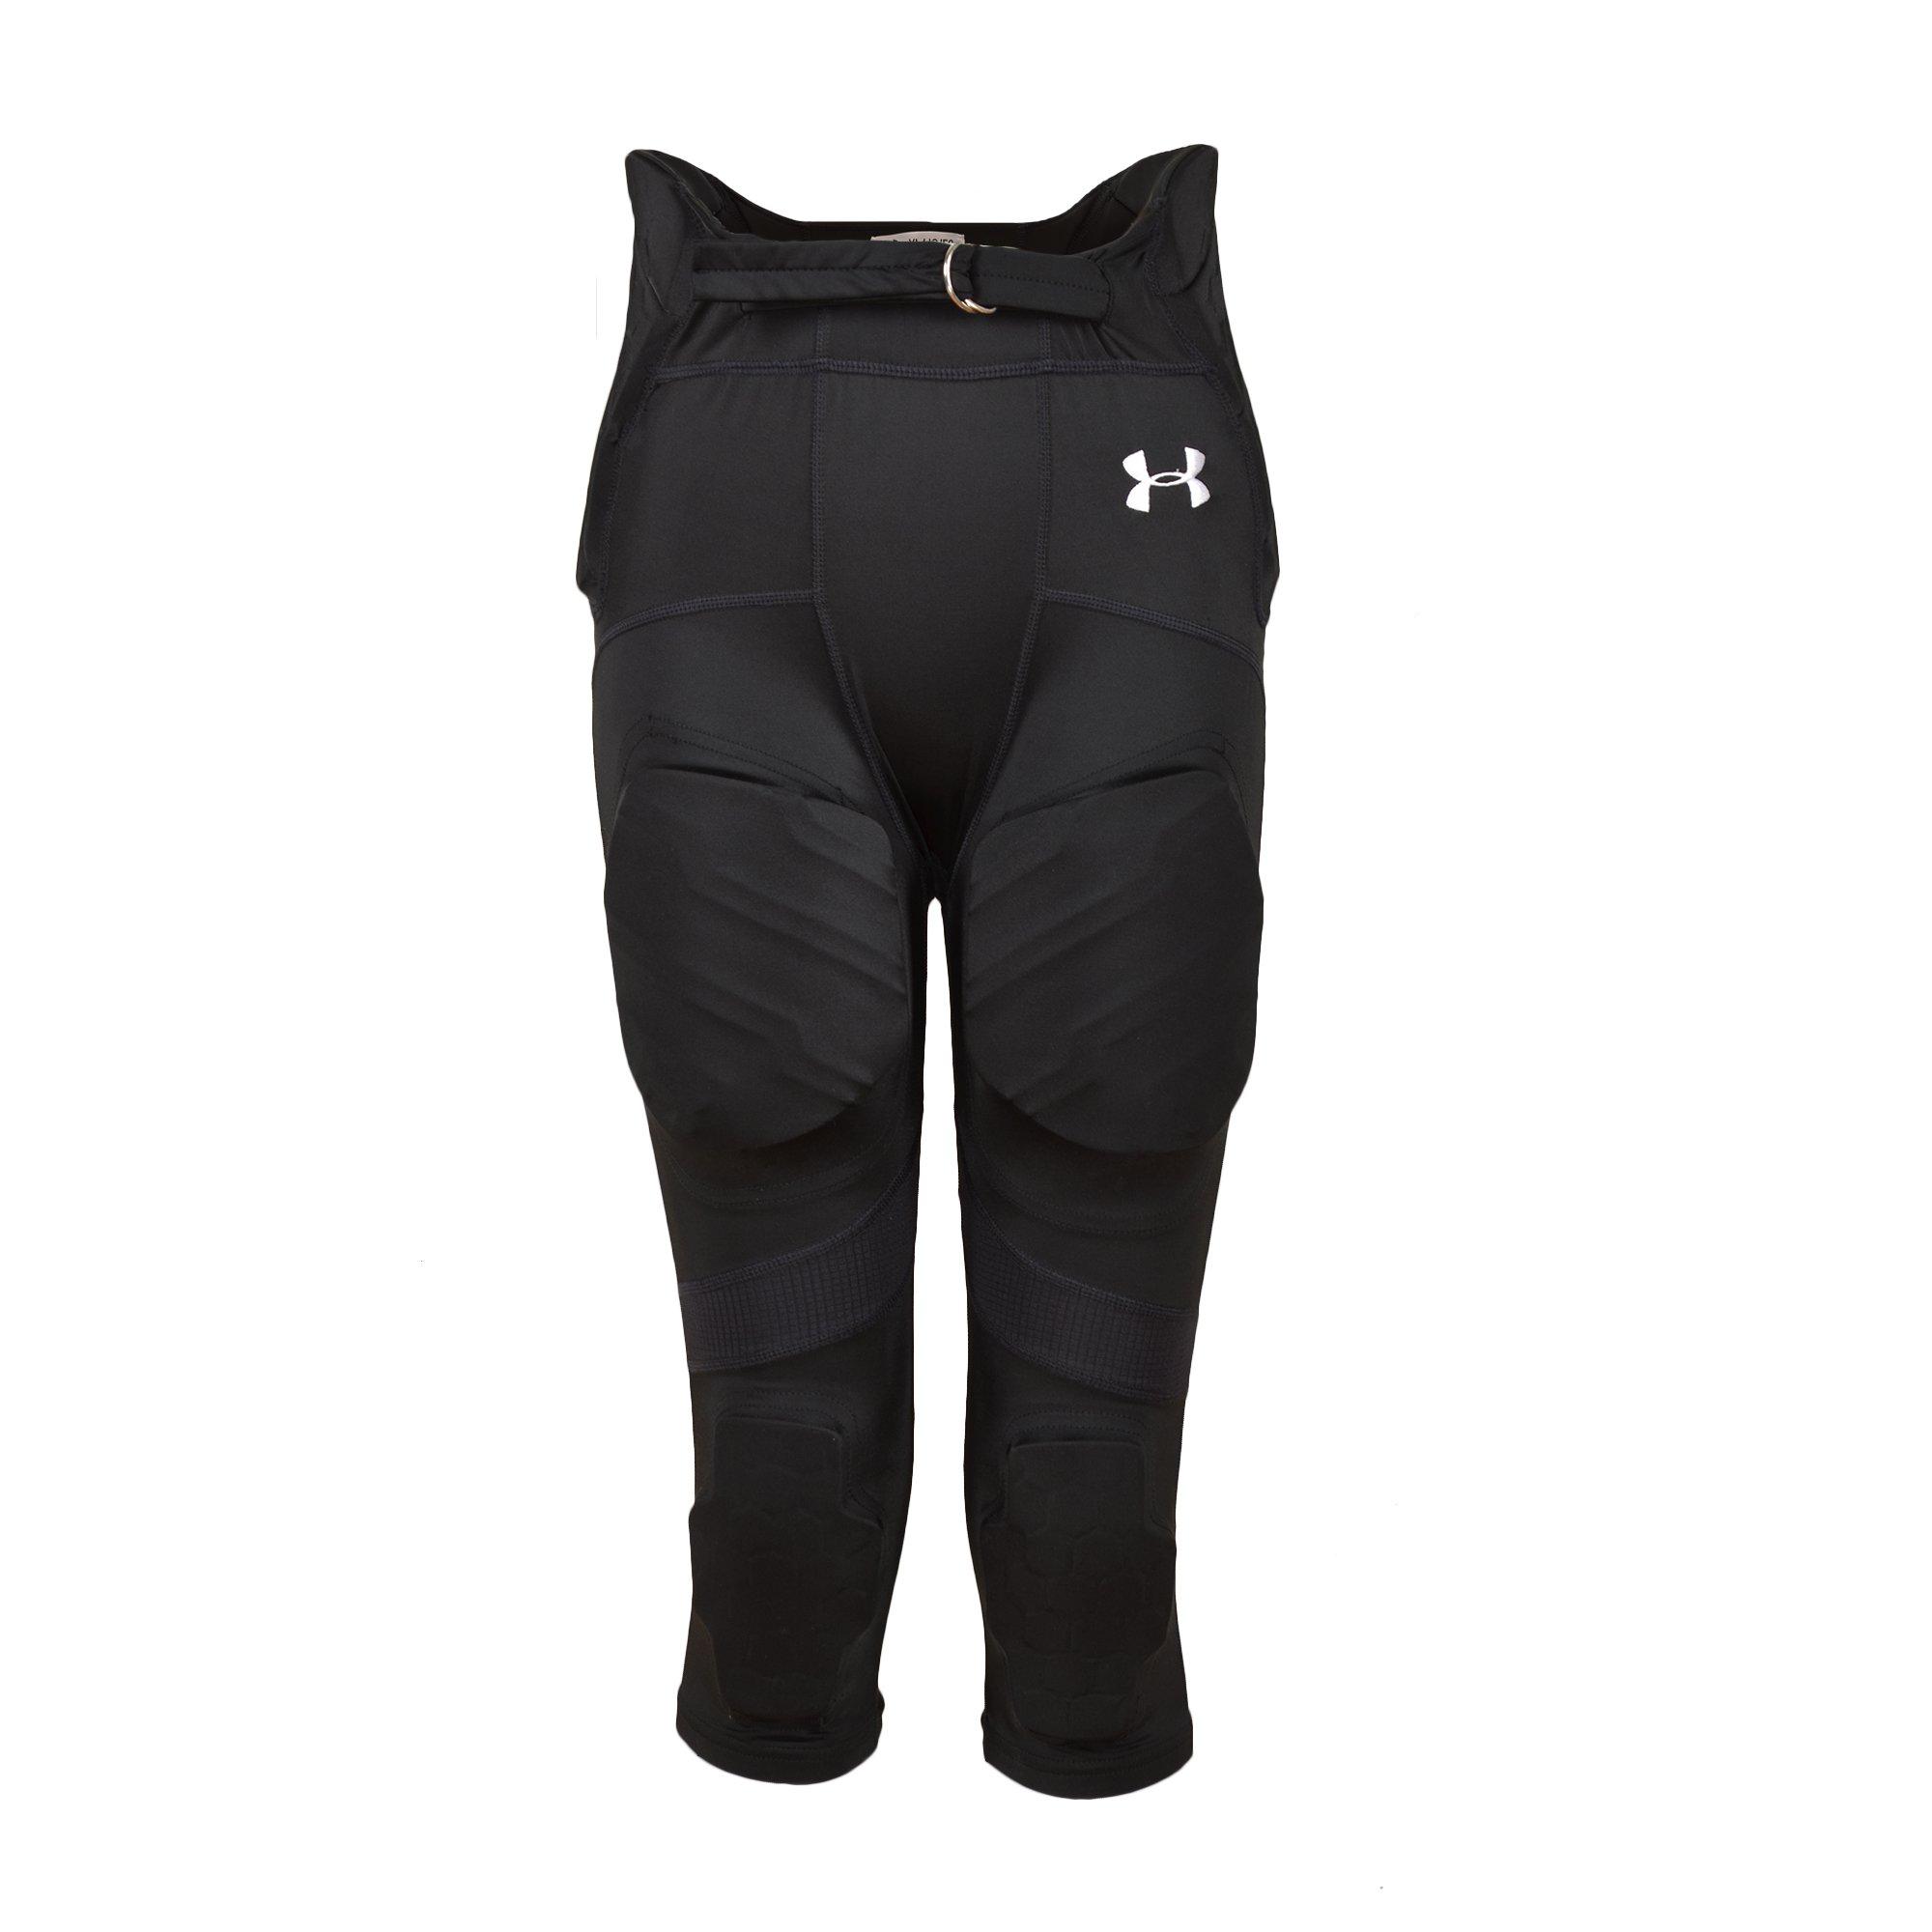 Under Armour women's Recovery athletic Jogger Pants XXL retail $100